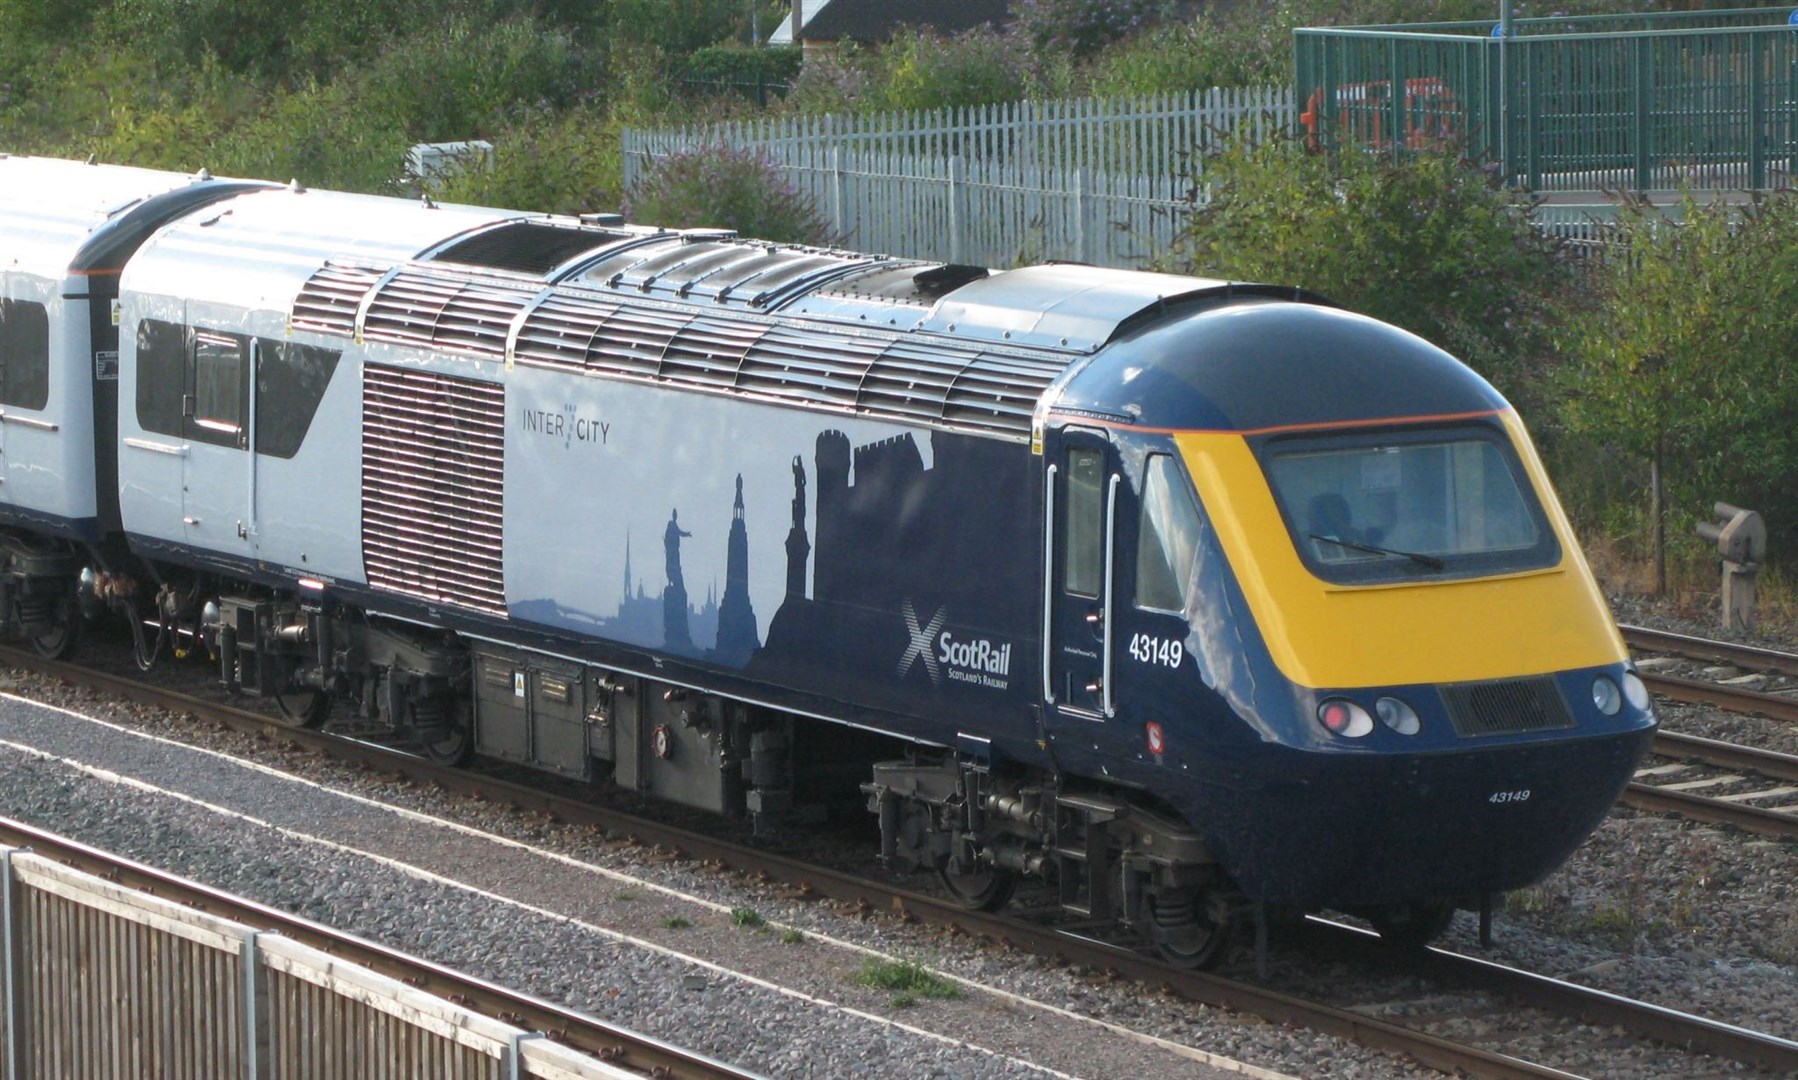 One of the 'new' ScotRail liveried InterCity 125s. Picture: Geof Sheppard, via Wikimedia Commons.